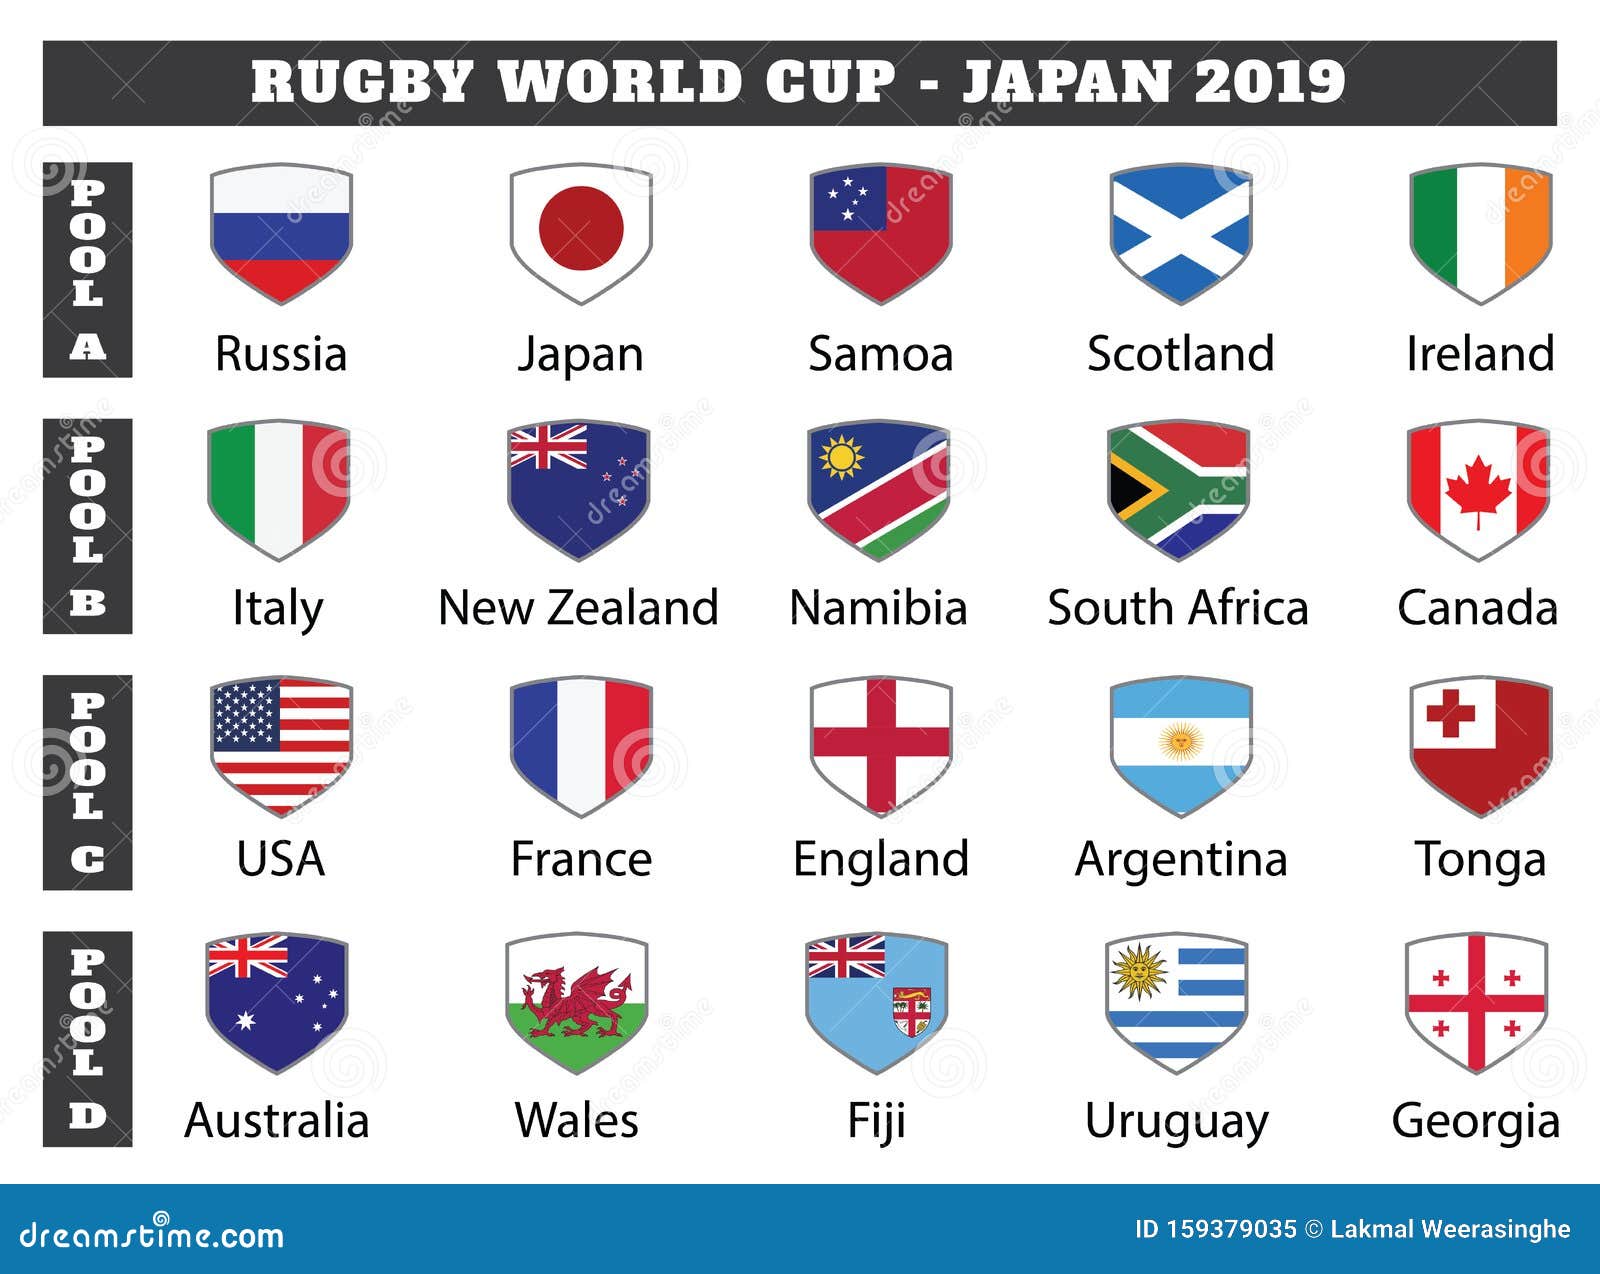 Rugby World Cup Teams